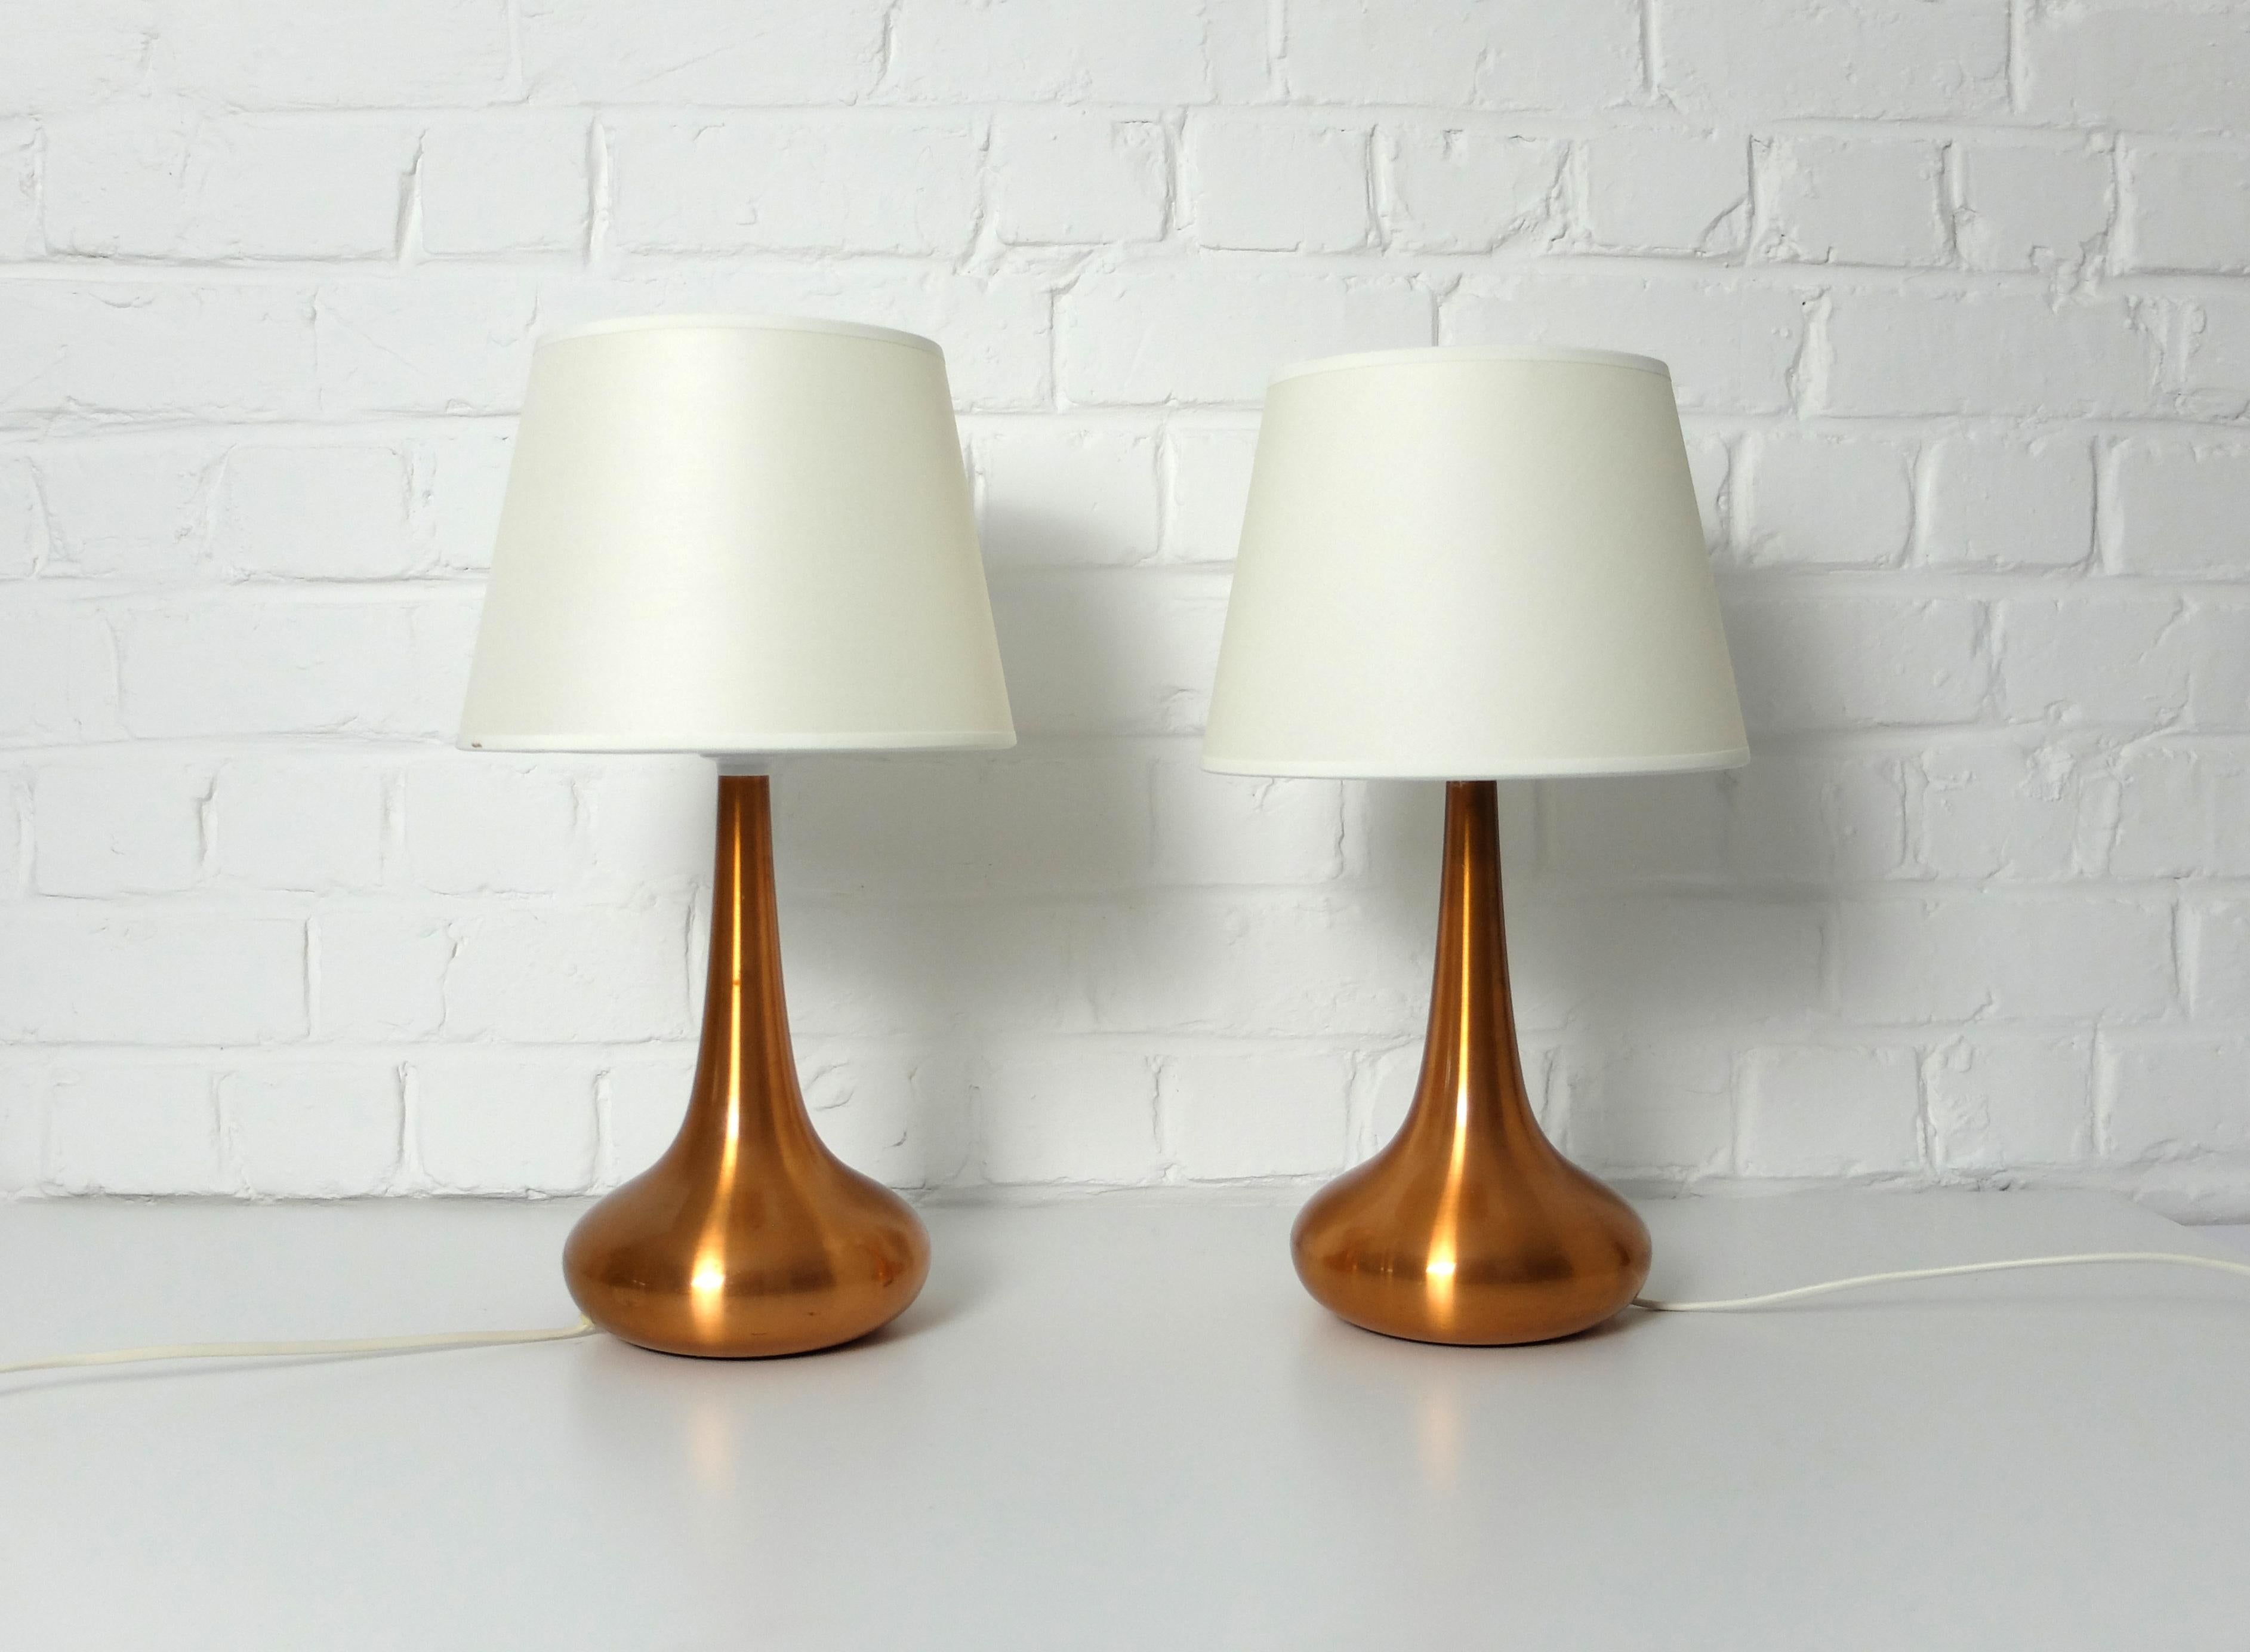 Pair of Orient table lamps in brushed copper. Design by Jo Hammerborg in 1957 for Fog & Morup, Denmark. 

Jo Hammerborg has been the art director of Fog & Morup for over 20 years. He designed a multitude of models, including the Orient range.